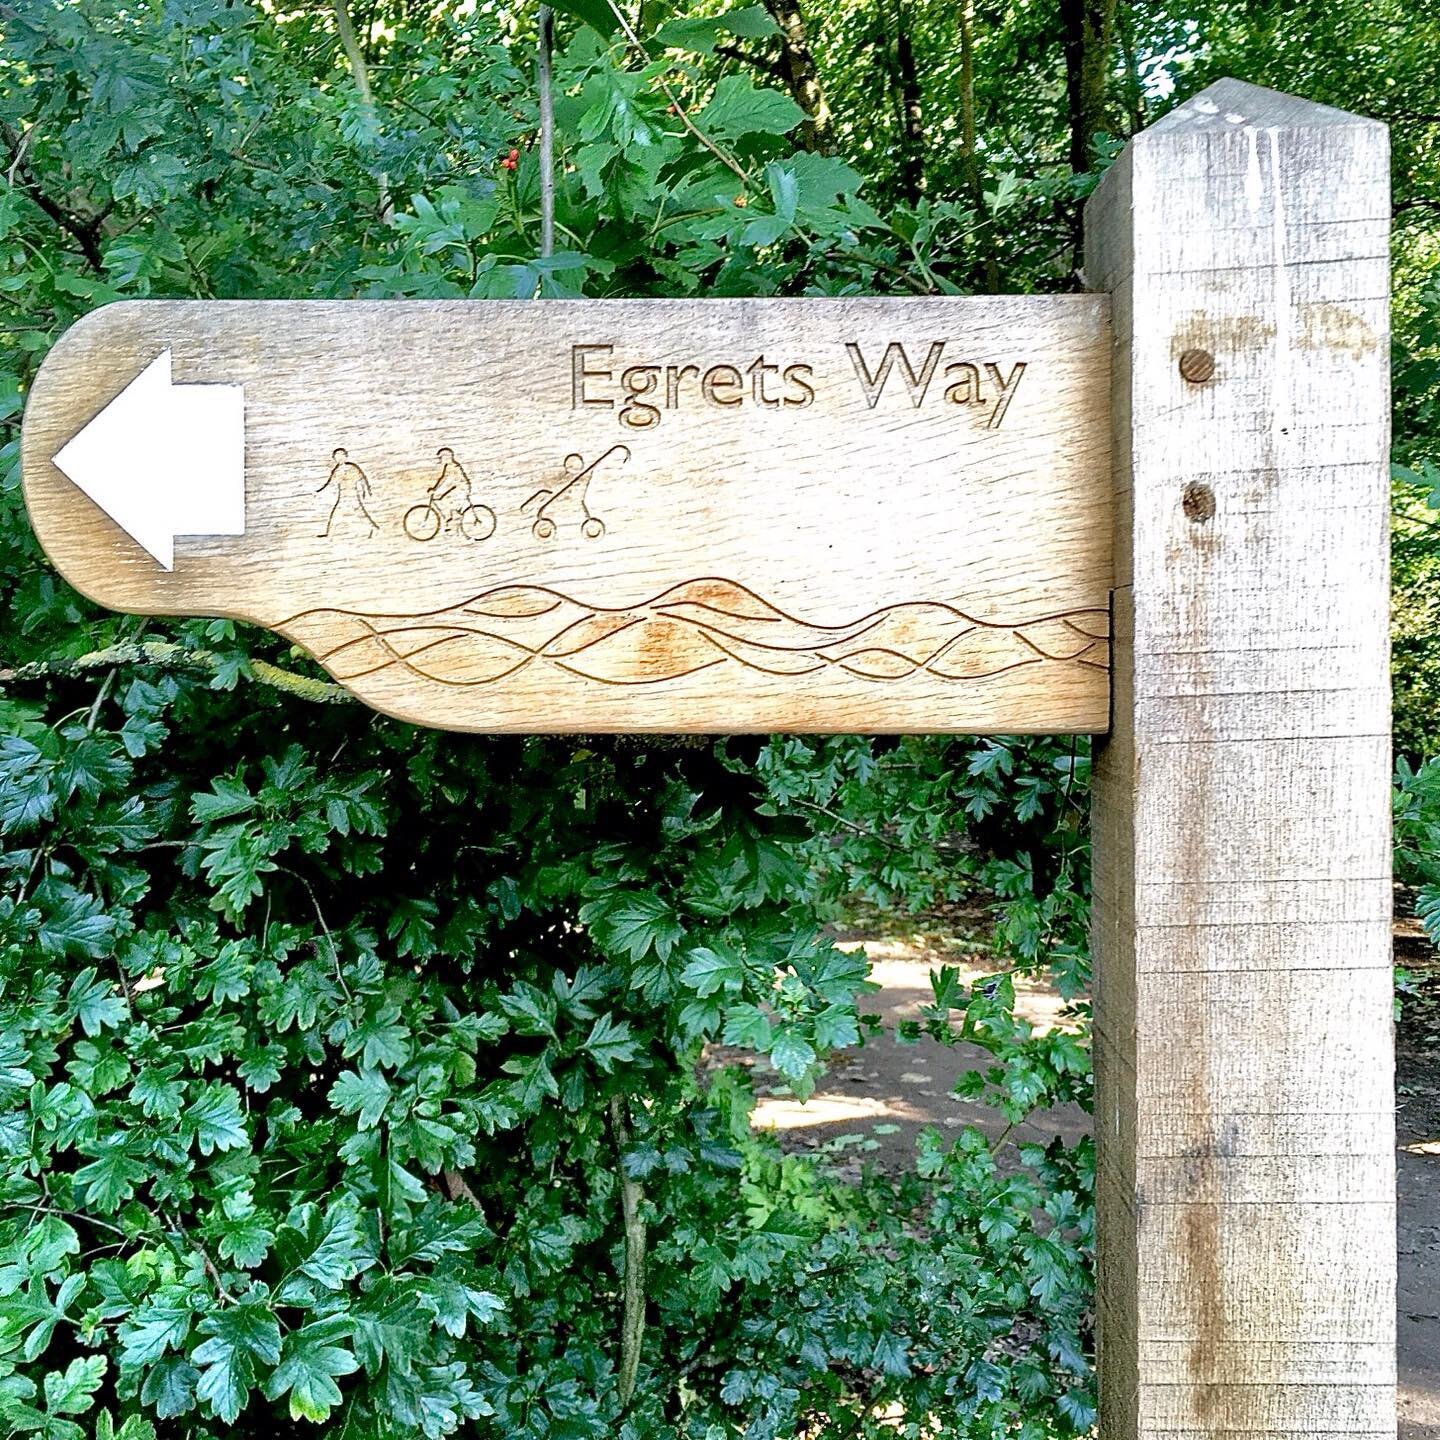 The new Railway Land Nature Reserve section of the Egrets Way opened in spring 2020. The route starts beside the Linklater Pavilion in Lewes. #egretswayart #egretsway #sussexcycling #sustrans #southdownsway #southdownsnationalpark #railwaylandnaturer